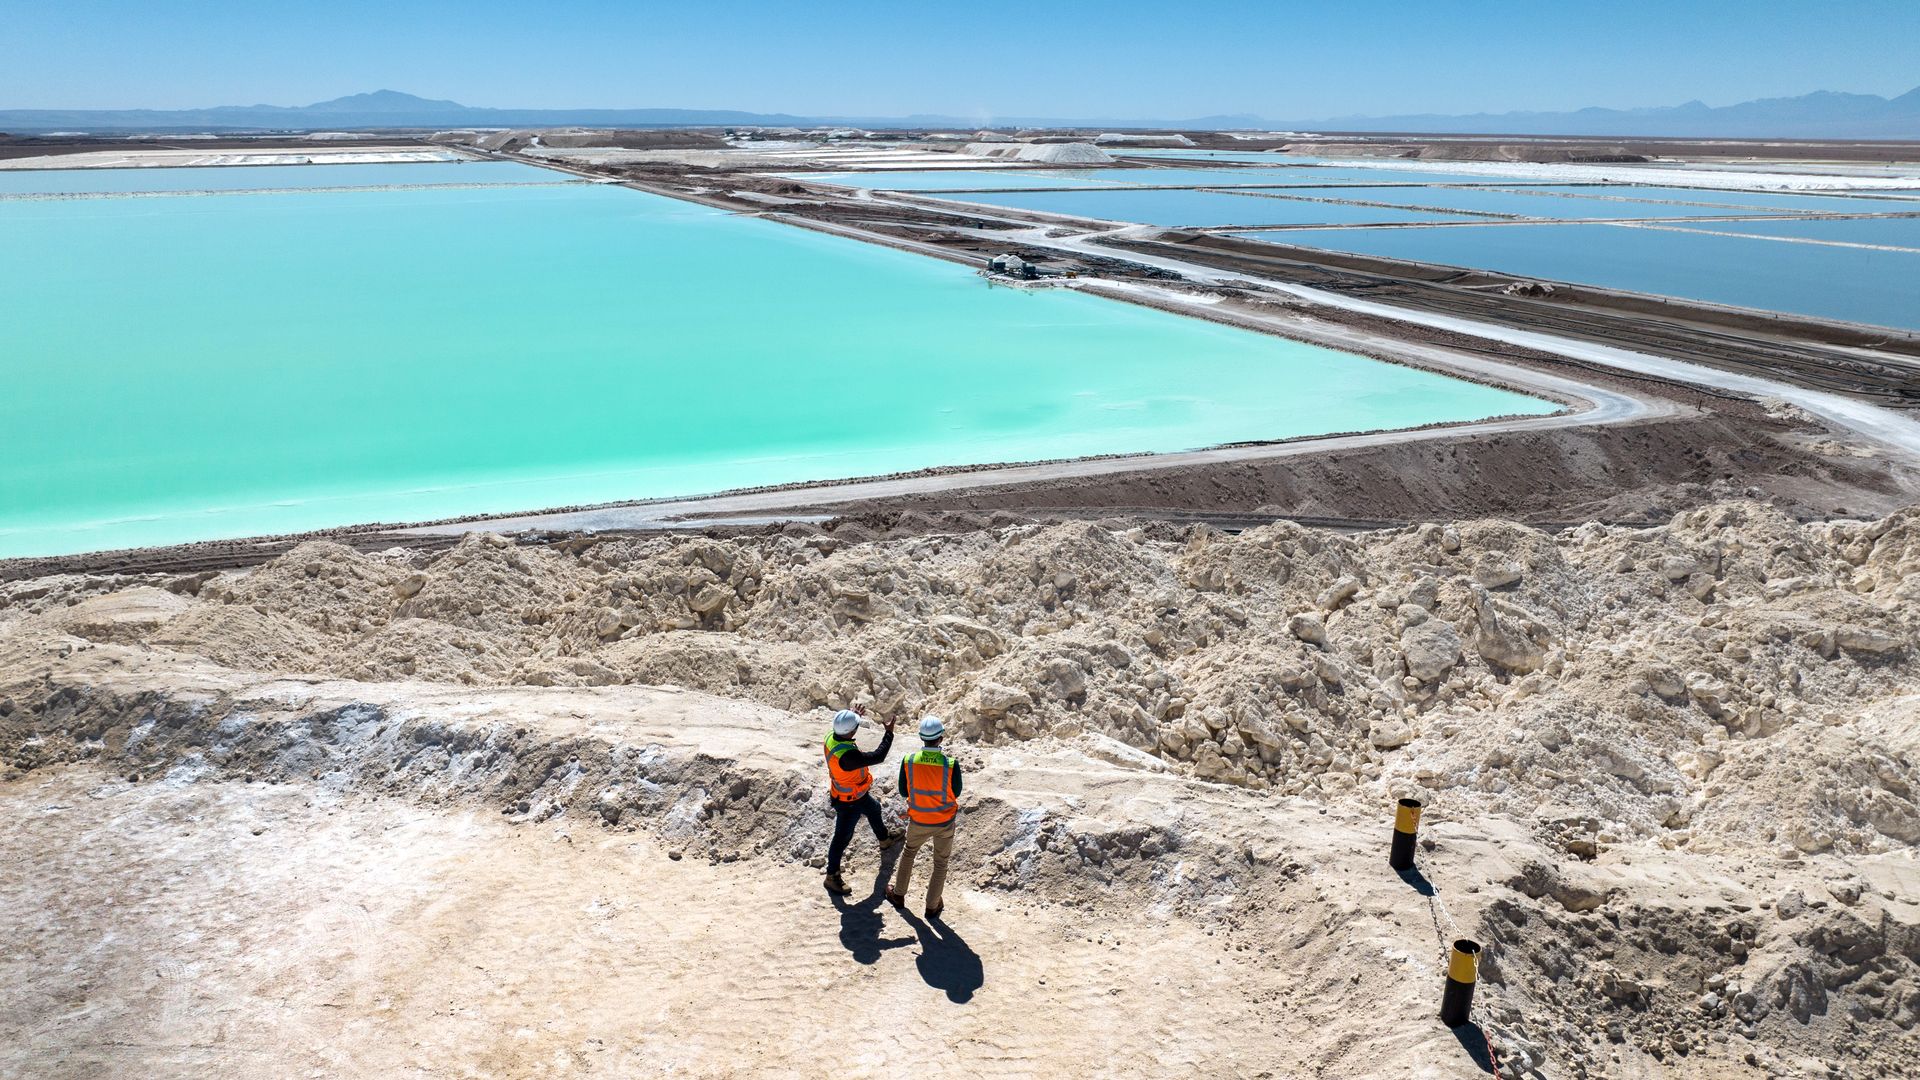 visitors stand atop a large mound of salt bi-product from lithium production at a lithium mine in the Atacama Desert on August 24, 2022 in Salar de Atacama, Chile.